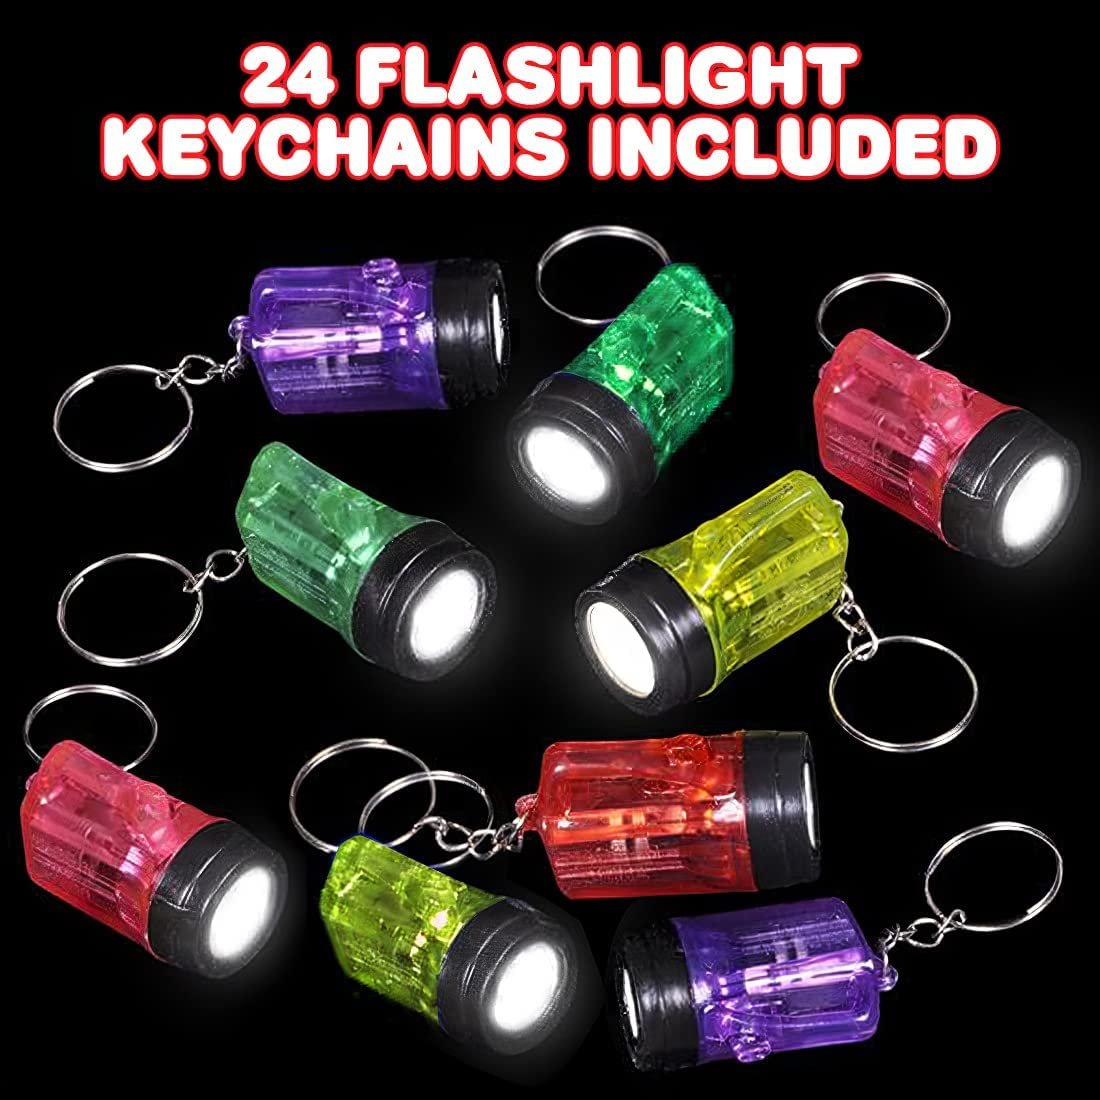 Mini Flashlight Keychains, Pack of 24, LED Key Chains for Kids in Assorted Colors, 1.5" Durable Plastic Keyholders, Birthday Party Favors, Goodie Bag Fillers